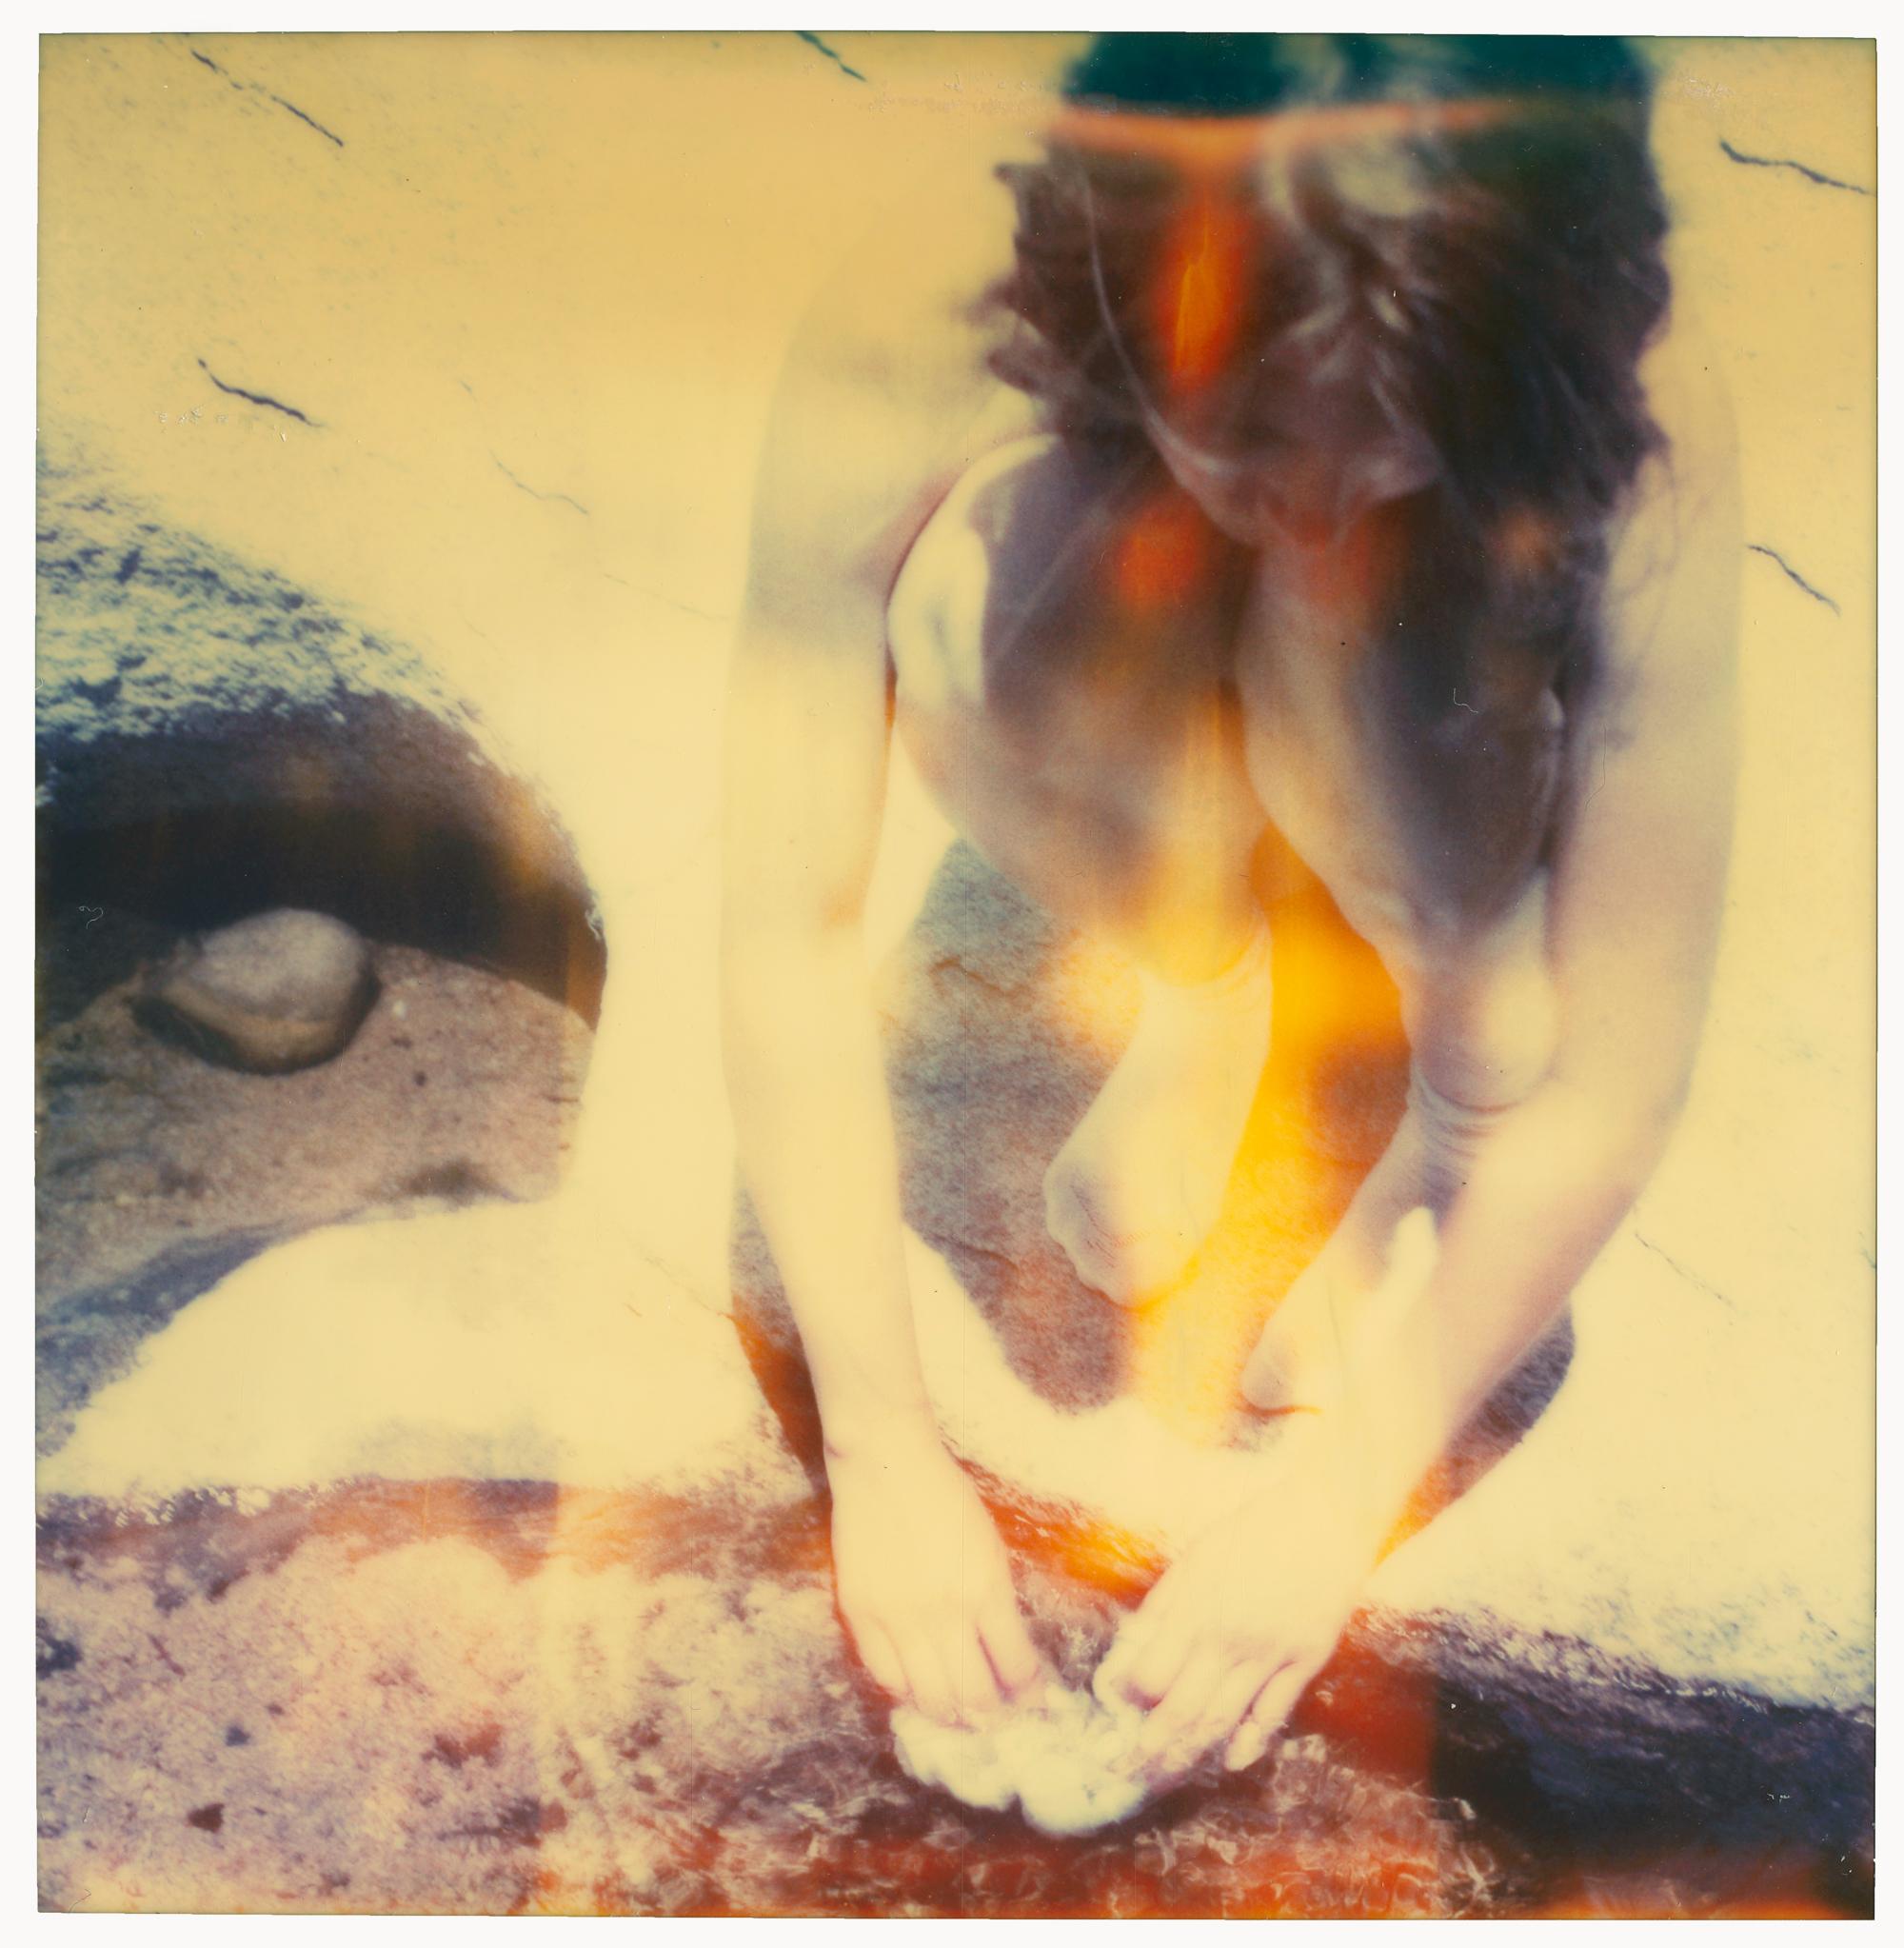 Waterhole - Planet of the Apes 05 - 21st Century, Polaroid, Abstract